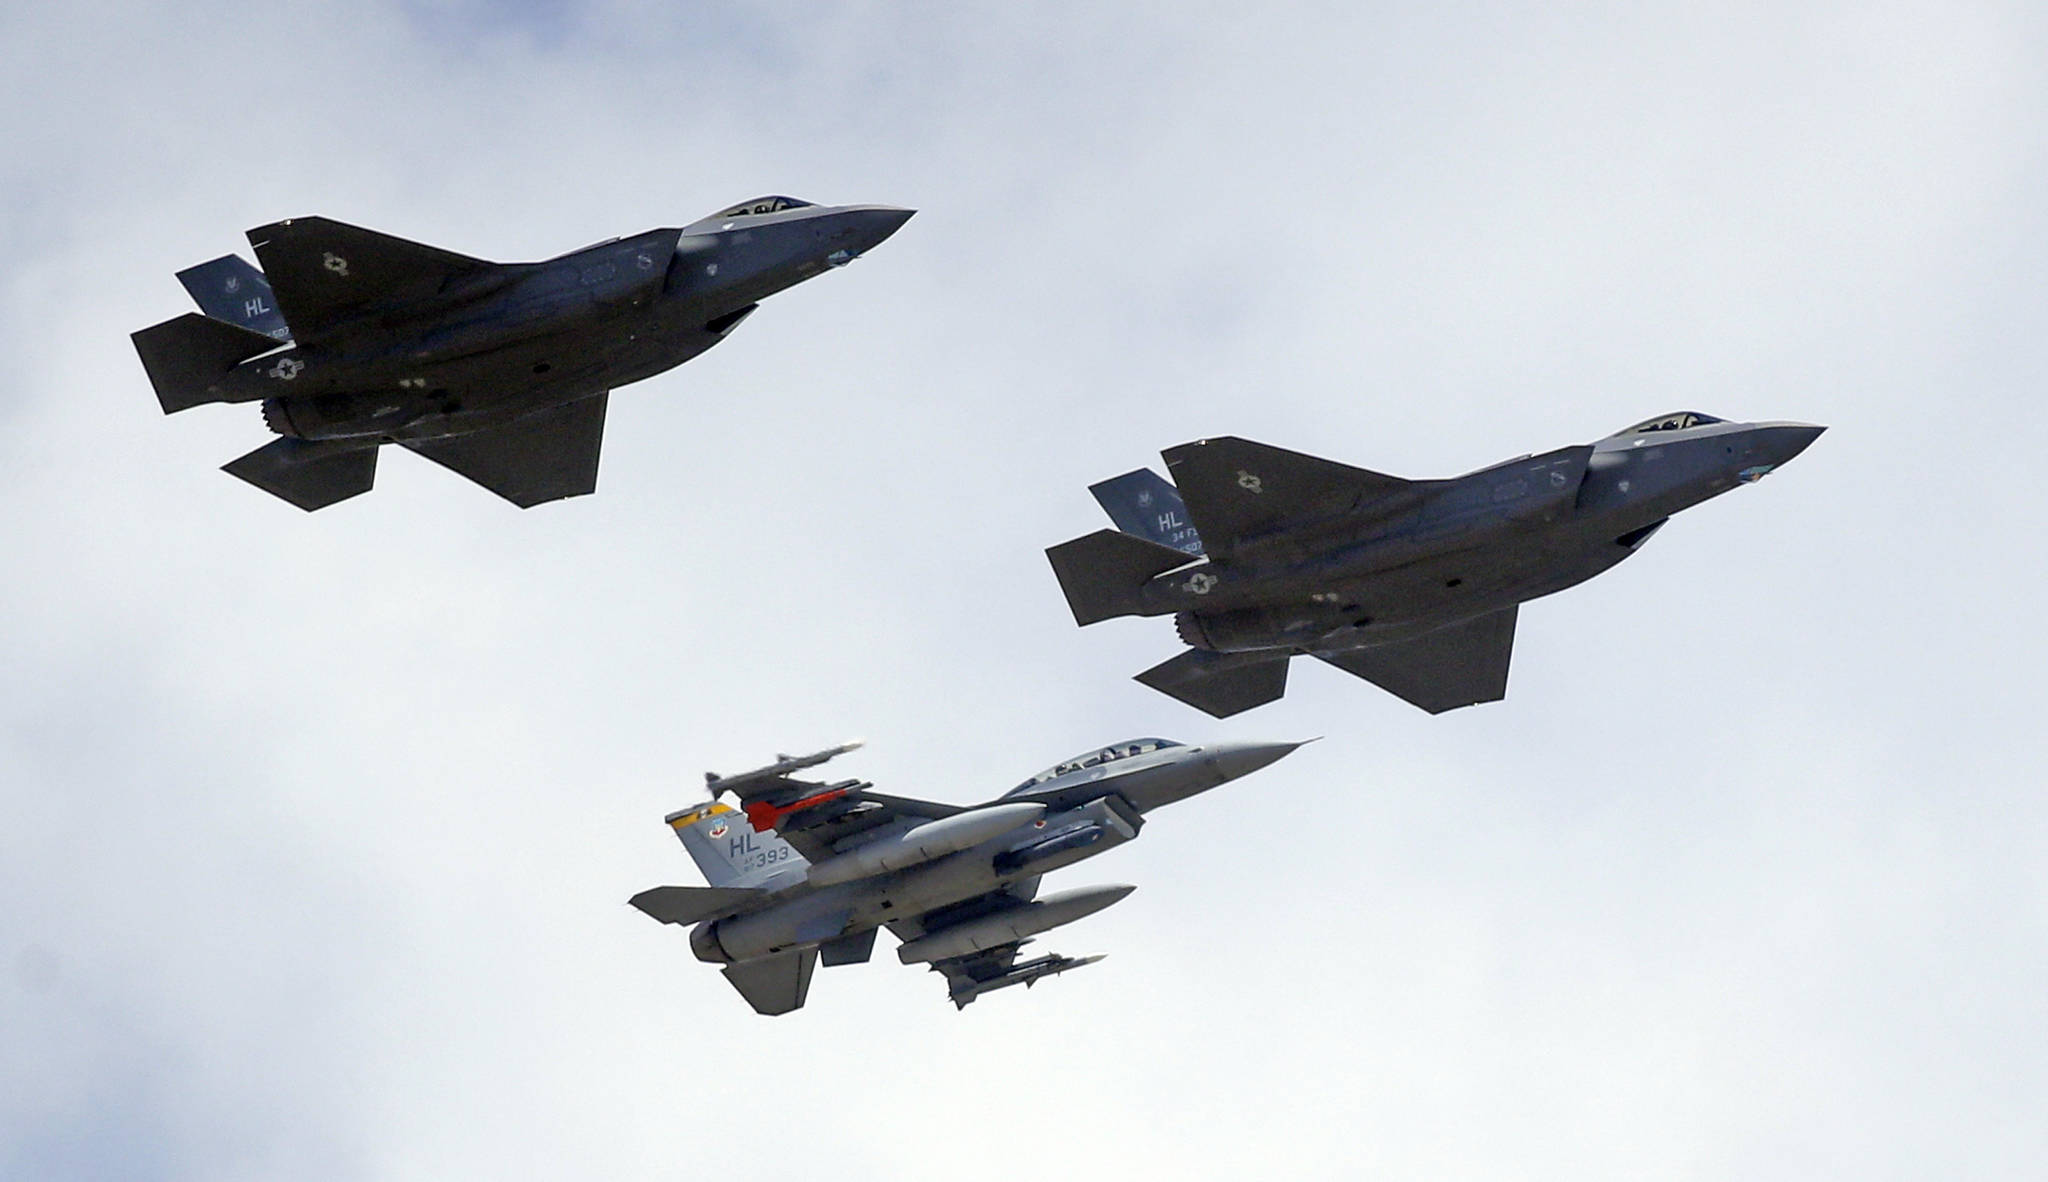 This Sept. 2, 2015 photo shows an F-16, below, escorting two F-35 jets, above, after arriving the latter arrived at Hill Air Force Base in Utah. The U.S. and its Asia-Pacific allies are rolling out their new stealth fighter jet, a cutting-edge plane that costs about $100 million each. (Rick Bowmer | The Associated Press File)